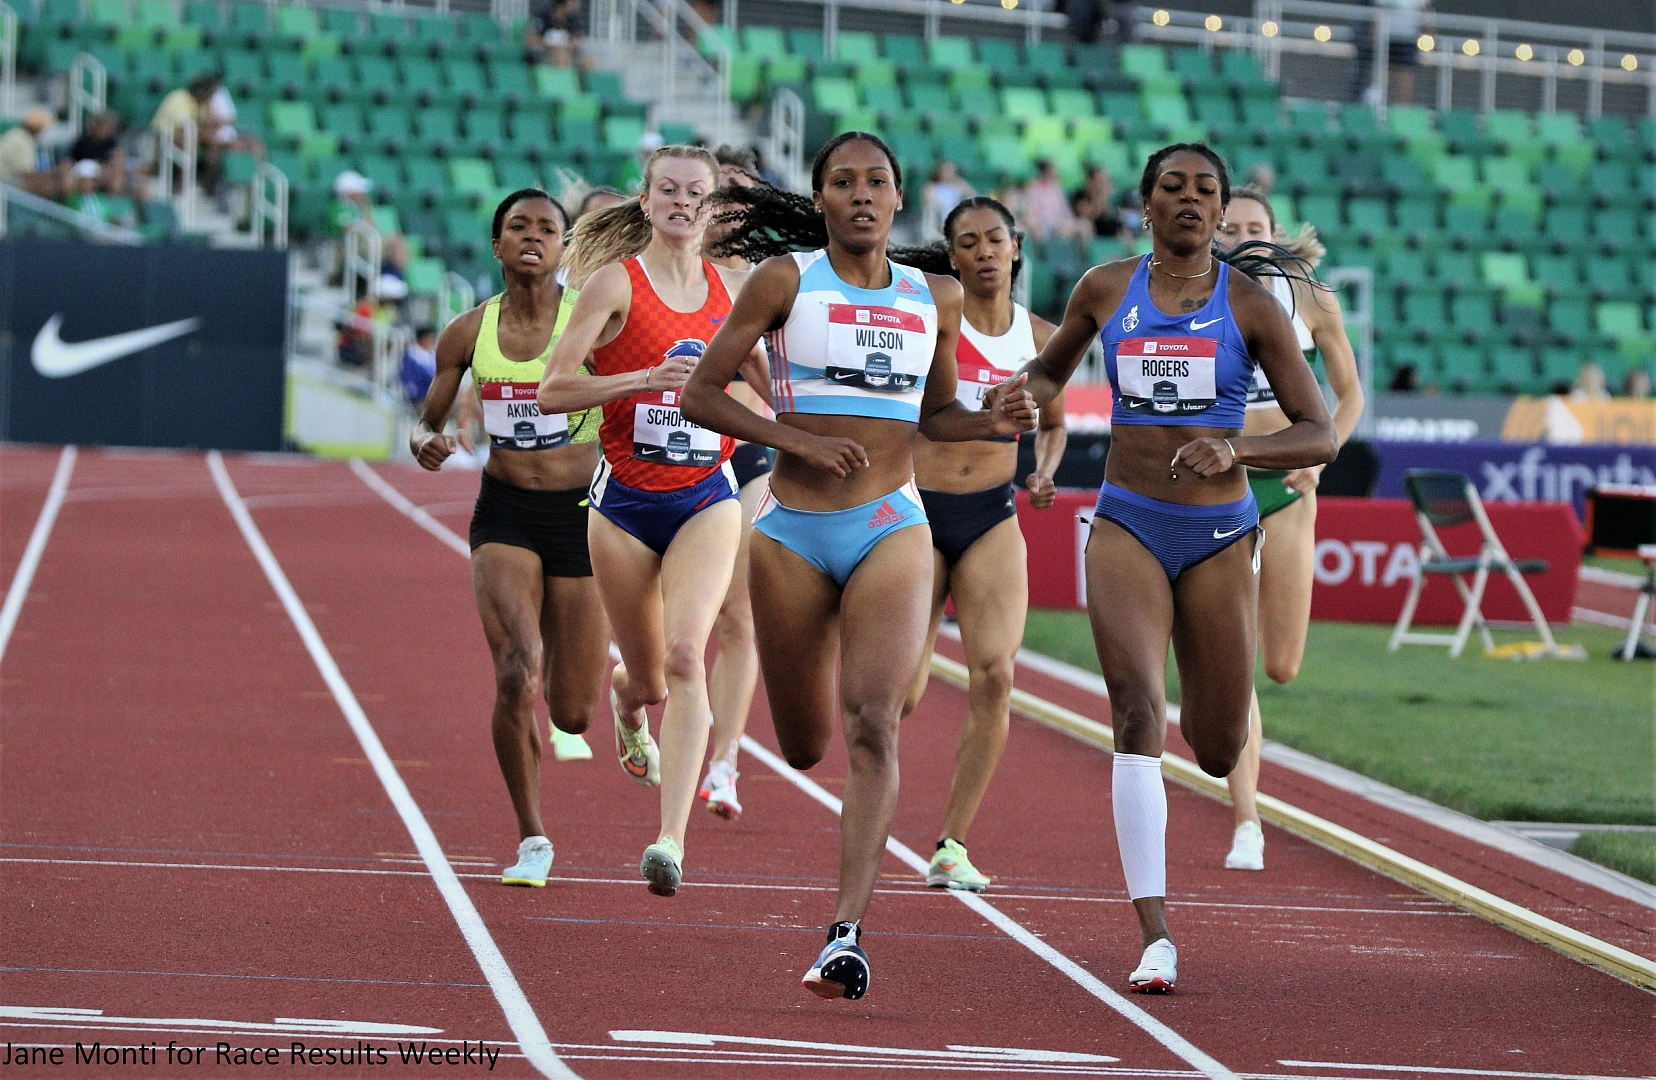 Akins, Rogers, Ajee Wilson advanced in 800m at USA Championships